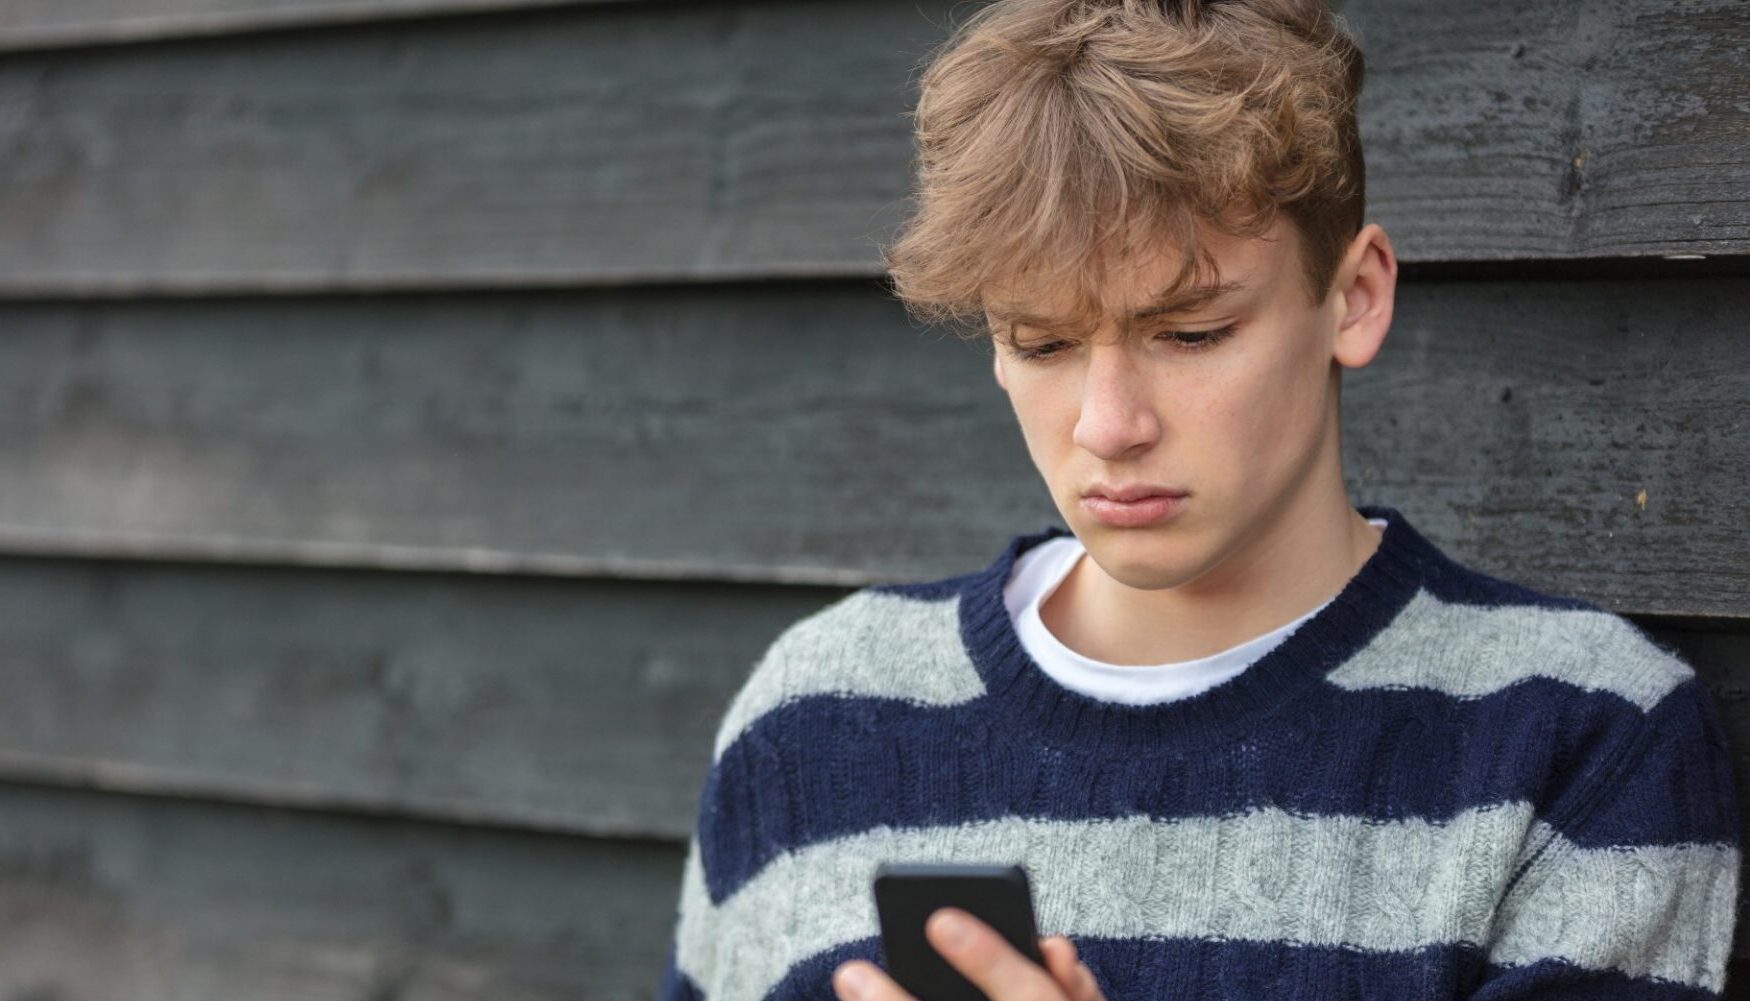 a teenage boy with blond hair is looking straight at the mobile phone in his hand with a confused expression